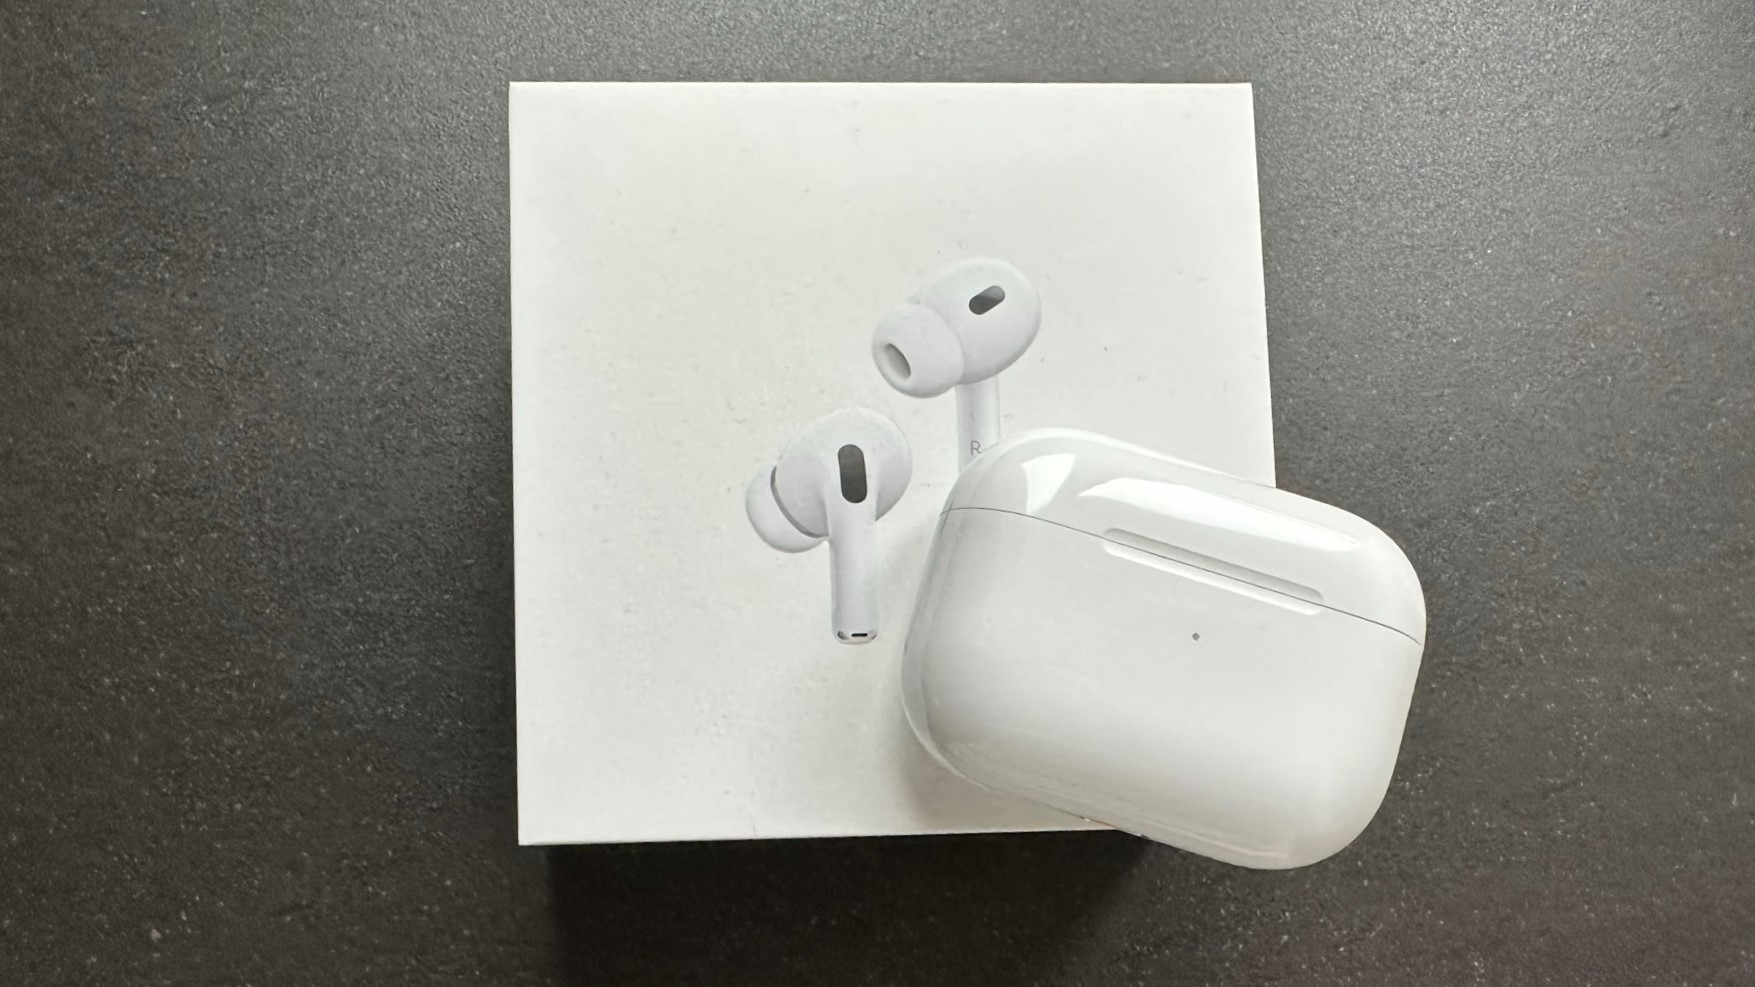 The price of the new AirPods Pro is 299 euros.